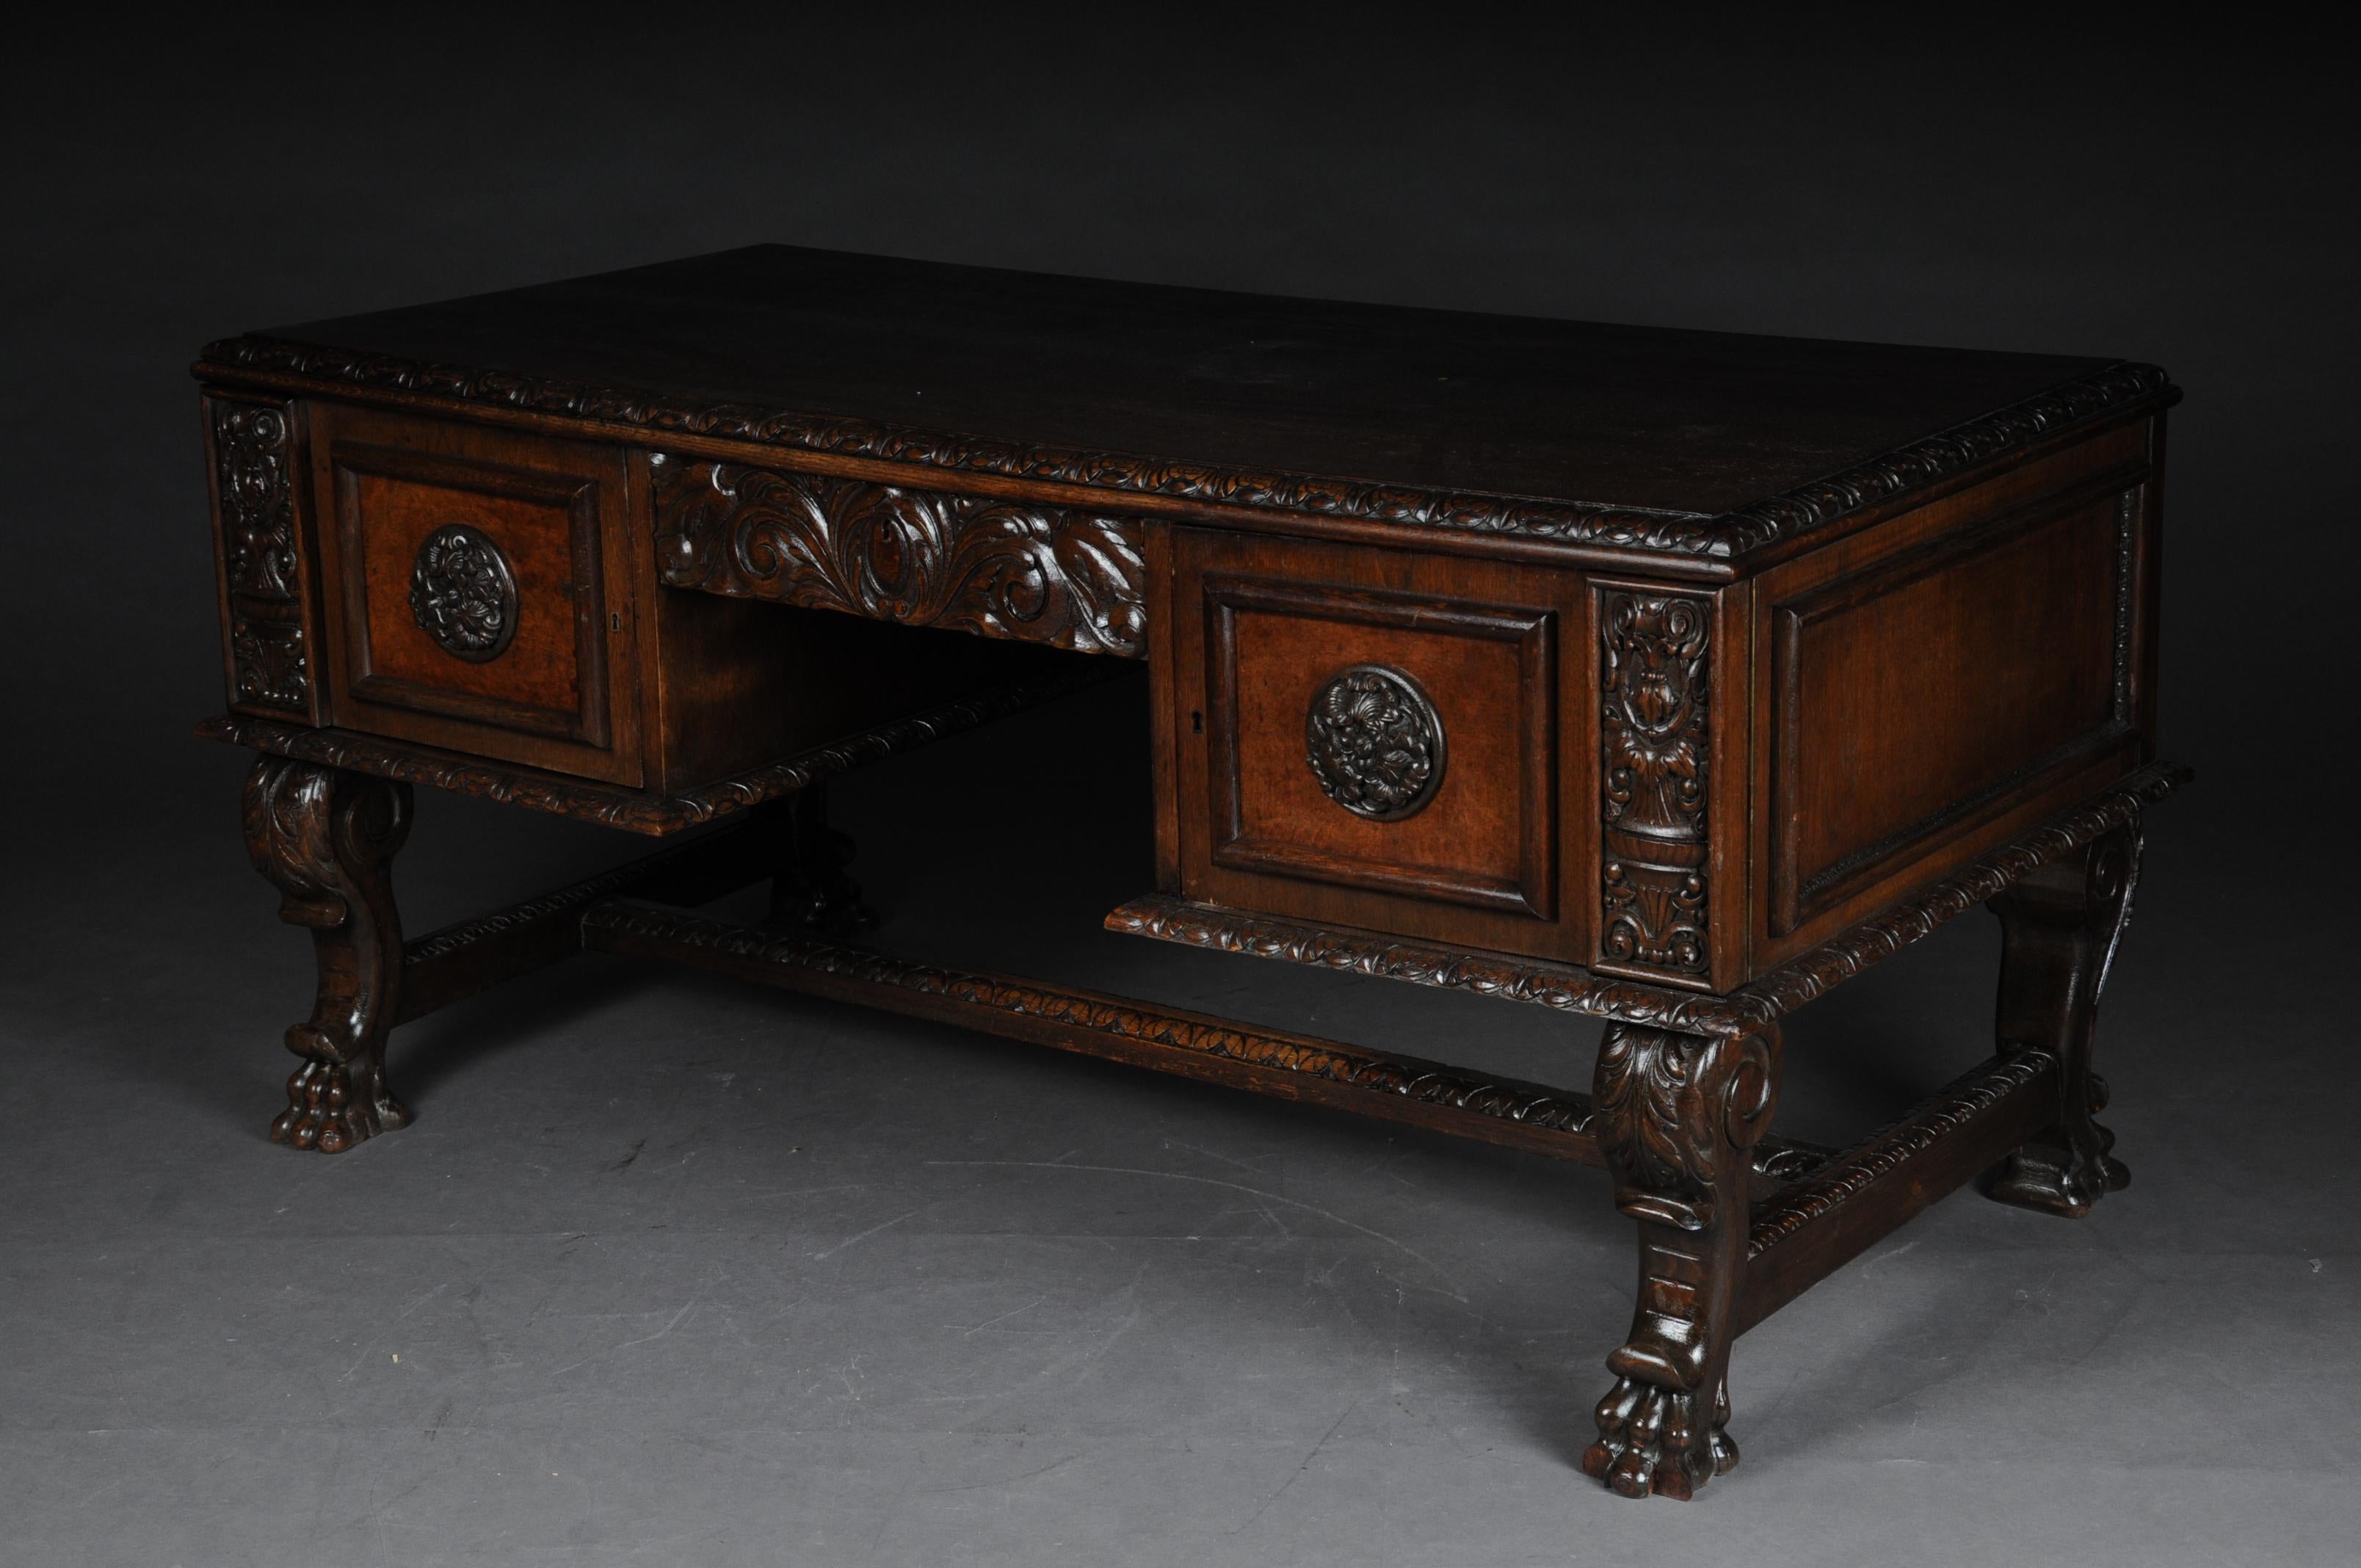 19th Century 20th Century Lordly Historicism Desk Solid Oak with Walnut Veneer For Sale